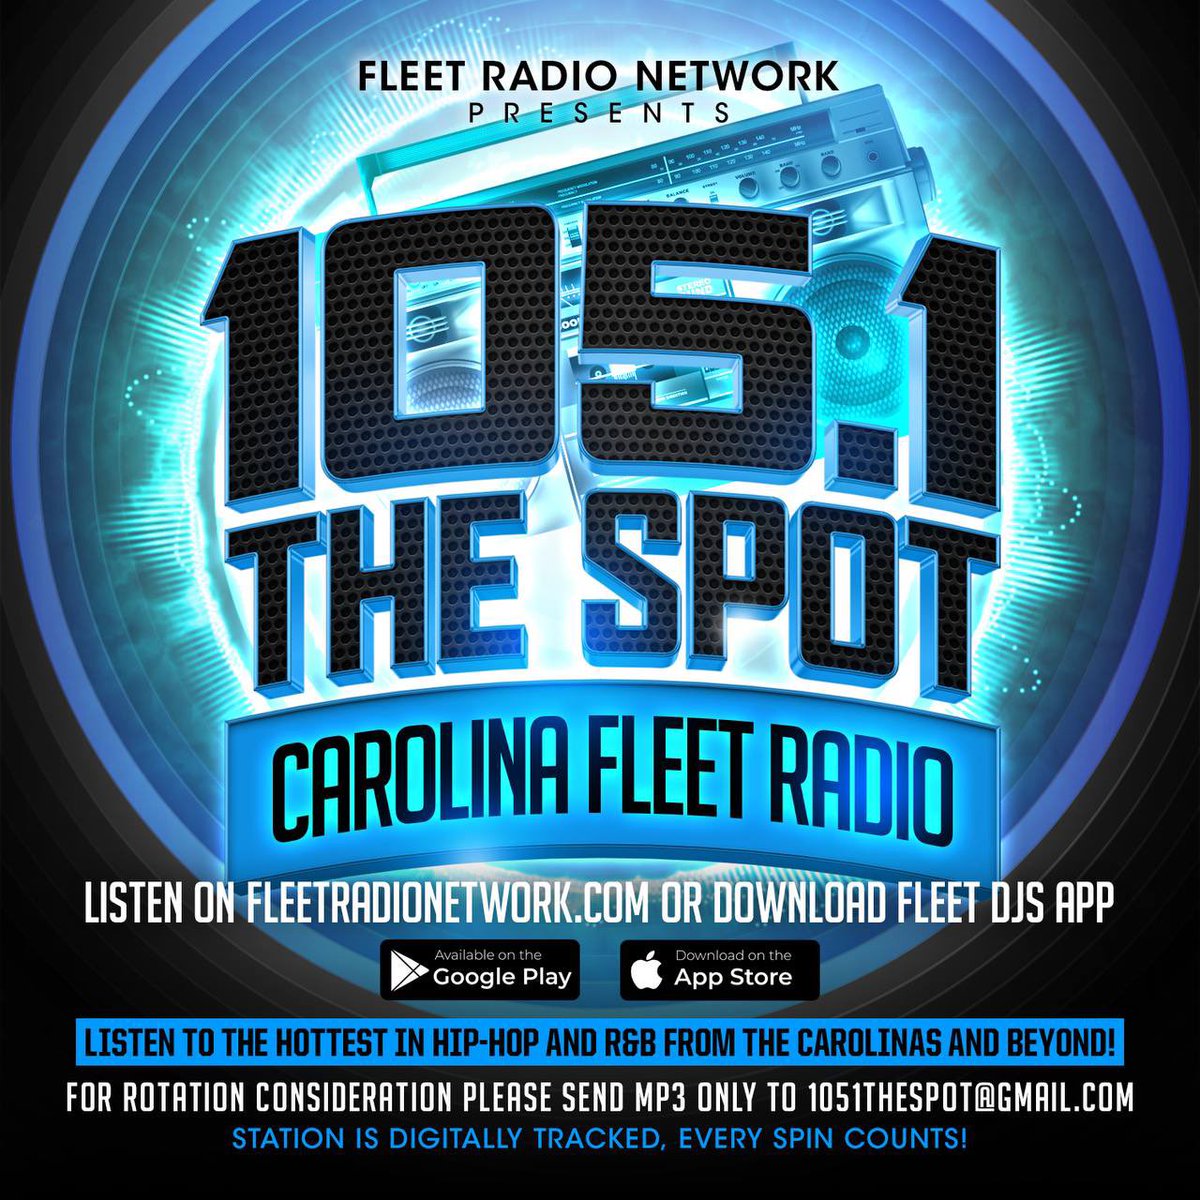 The Carolinas got a new dope radio station playing the hottest new hip hop and r&b with dope throwbacks and indie music @1051thespotradio on the fleetradionetwork app